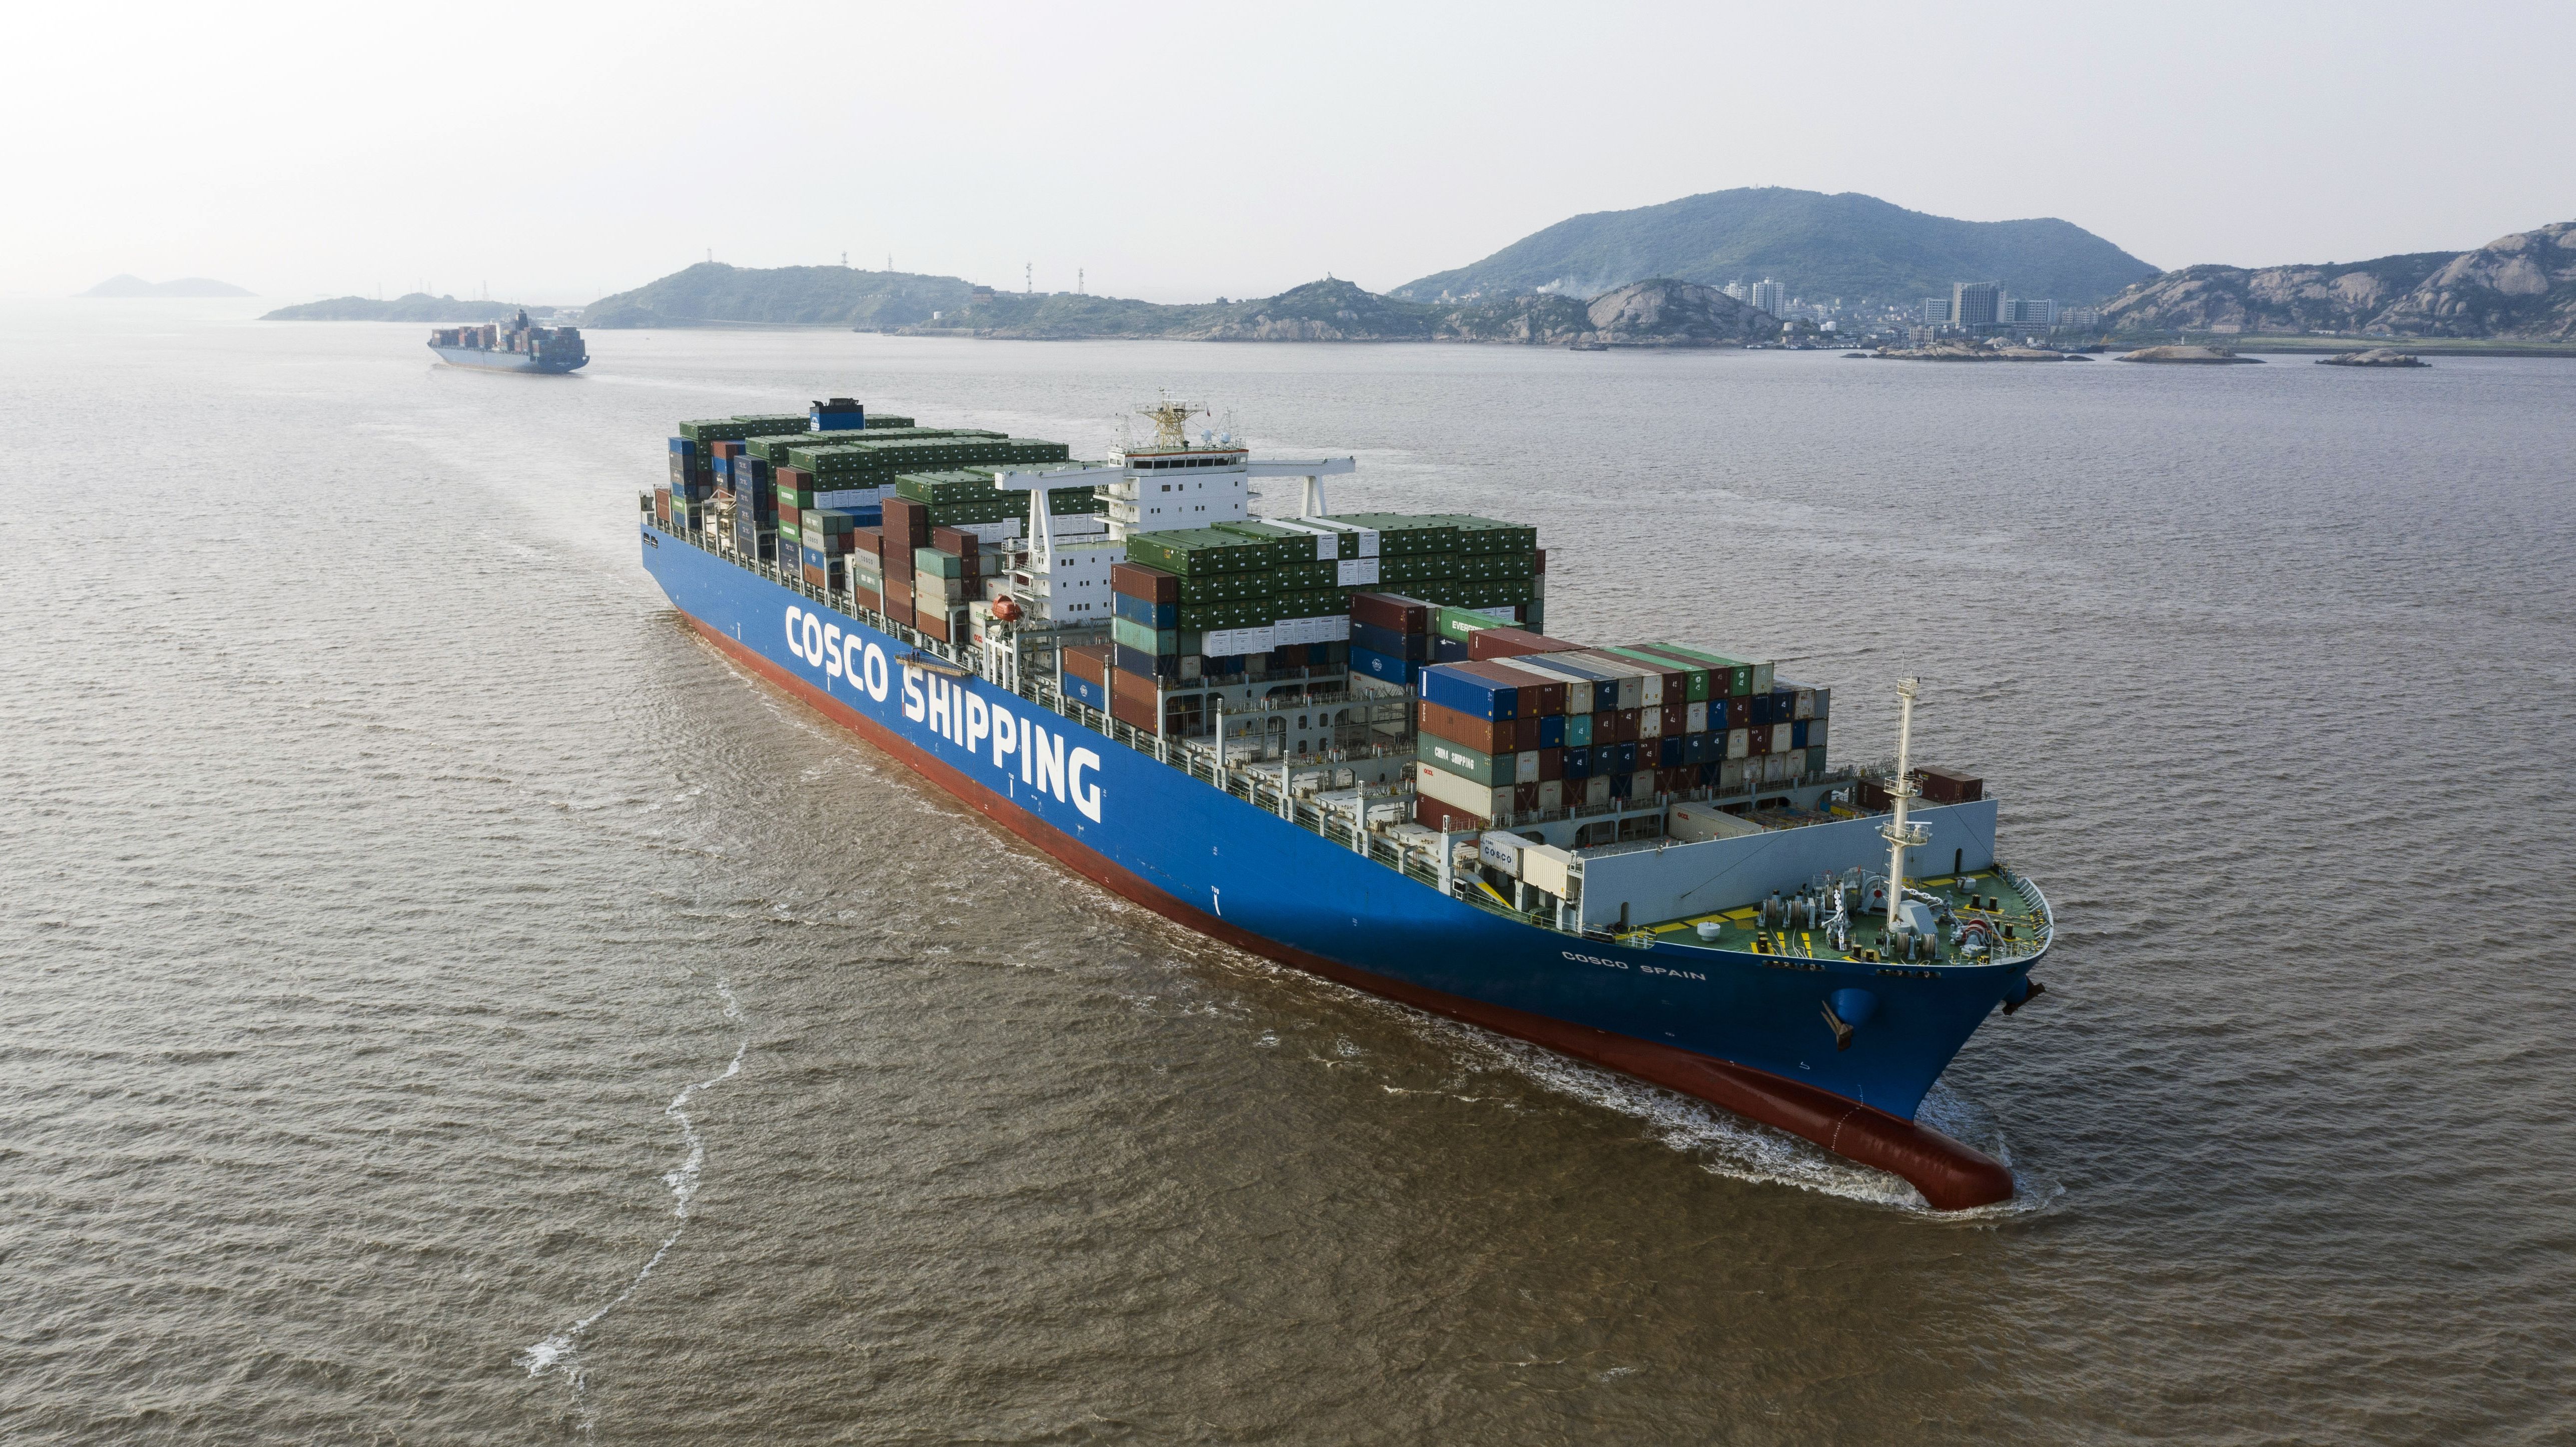 Major banks set new lending standards for shipping industry to cut CO2 emissions